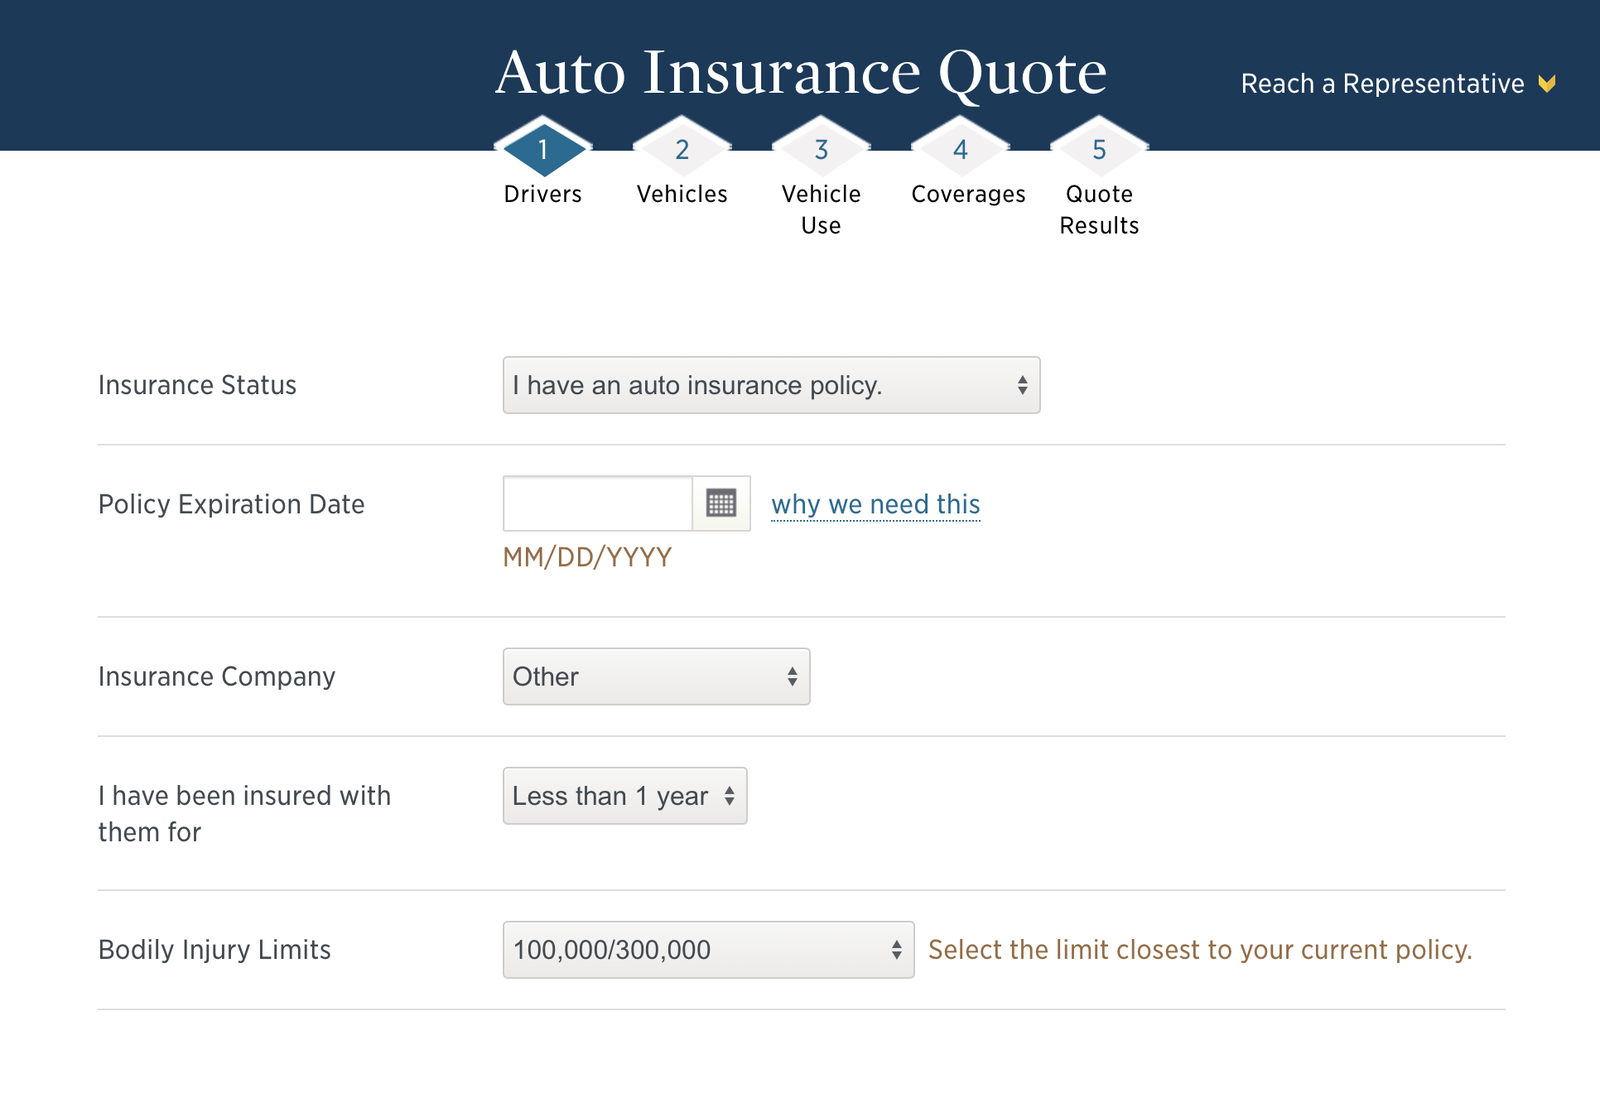 Steps for getting a USAA quote